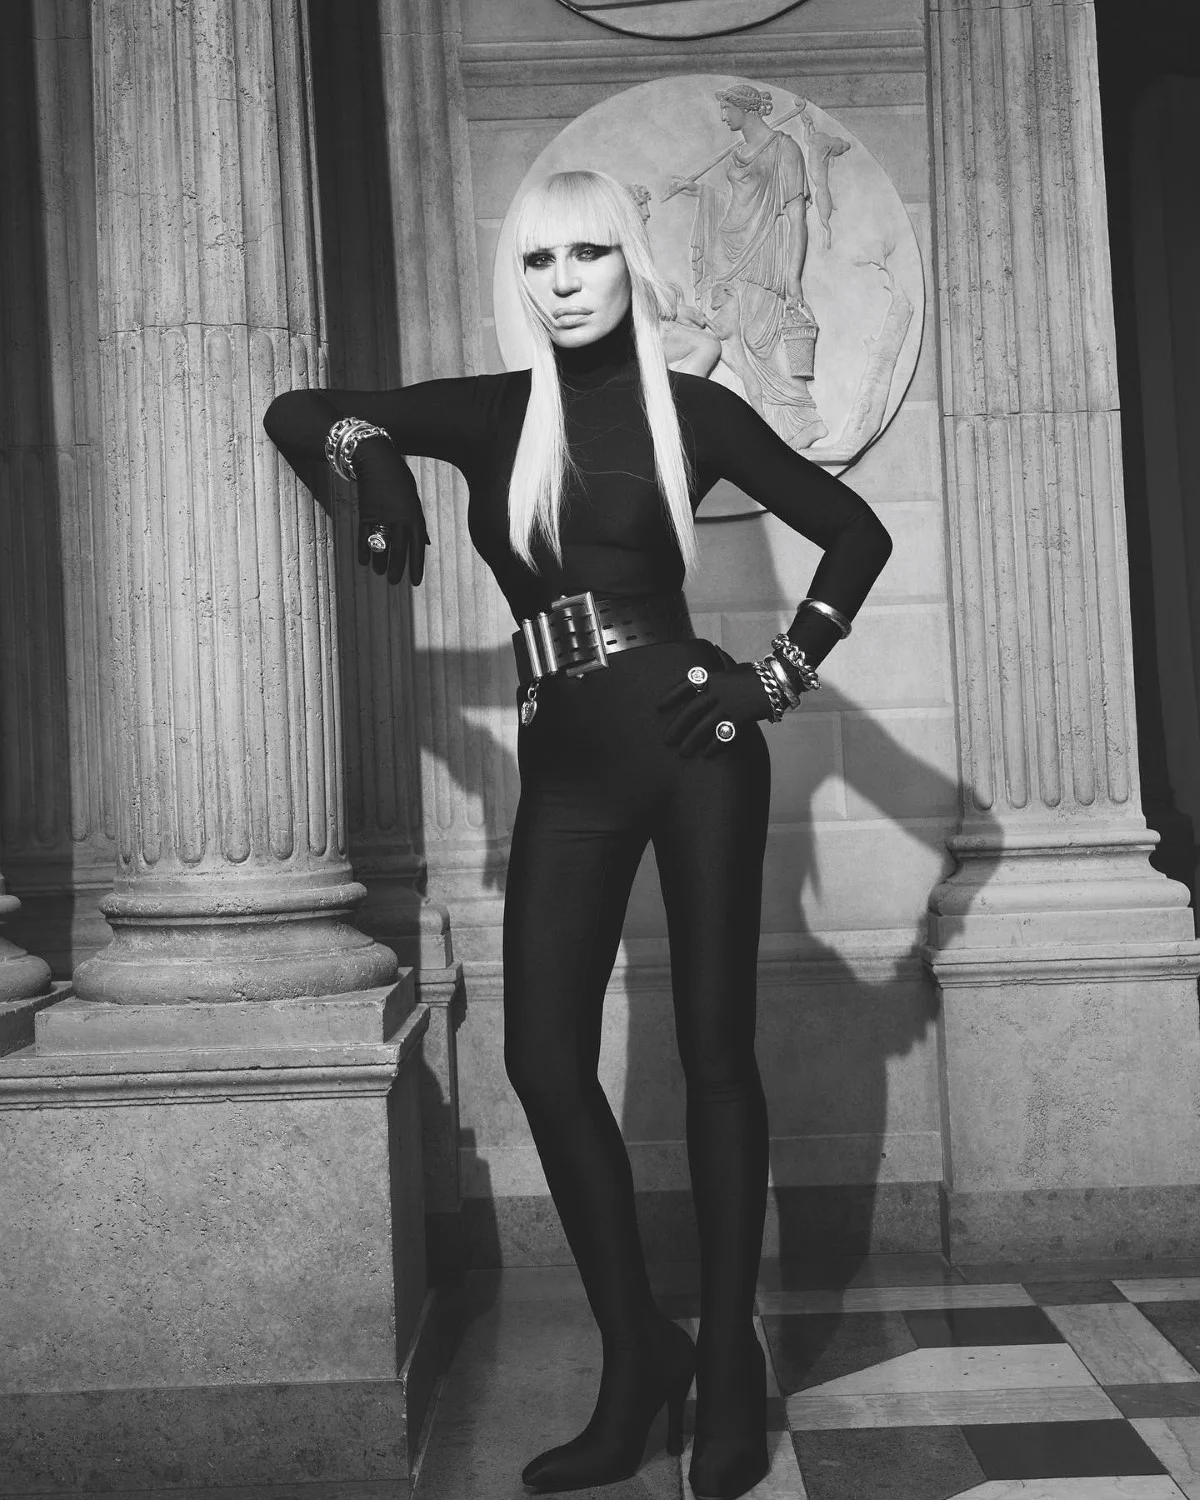 Donatella Versace covers Vogue Italia March 2022 by Mert & Marcus